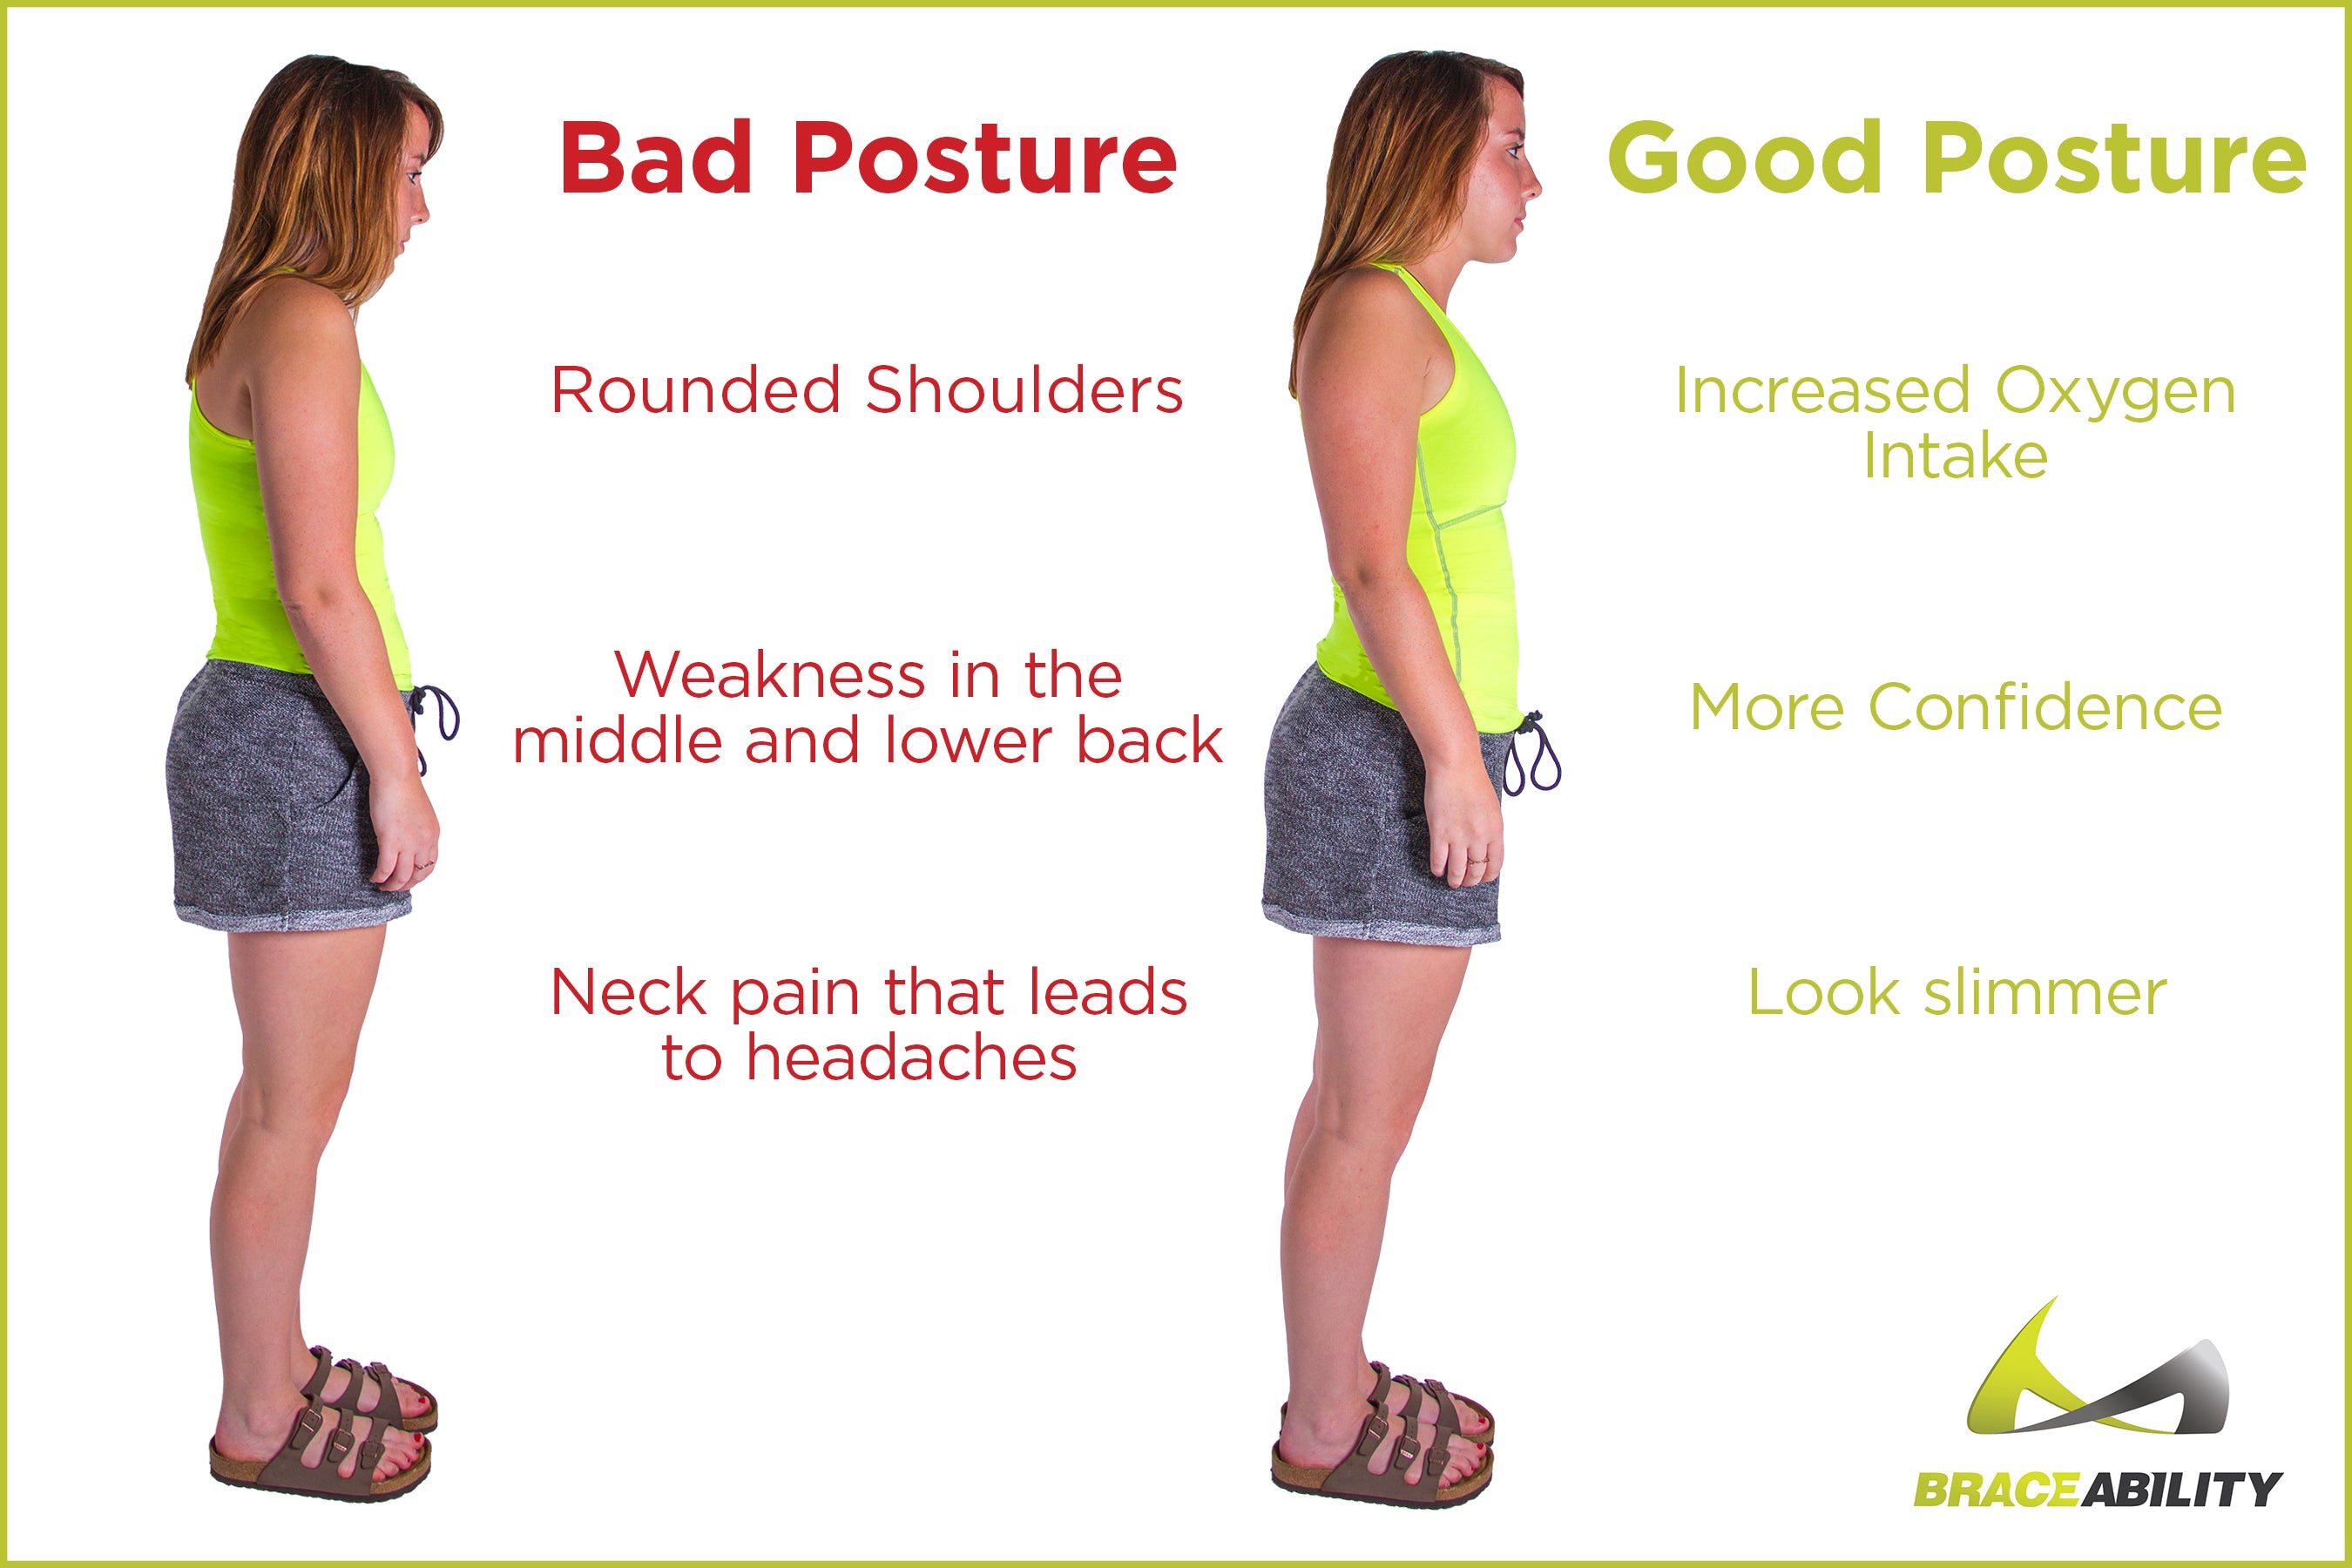 How to get proper posture when standing all day